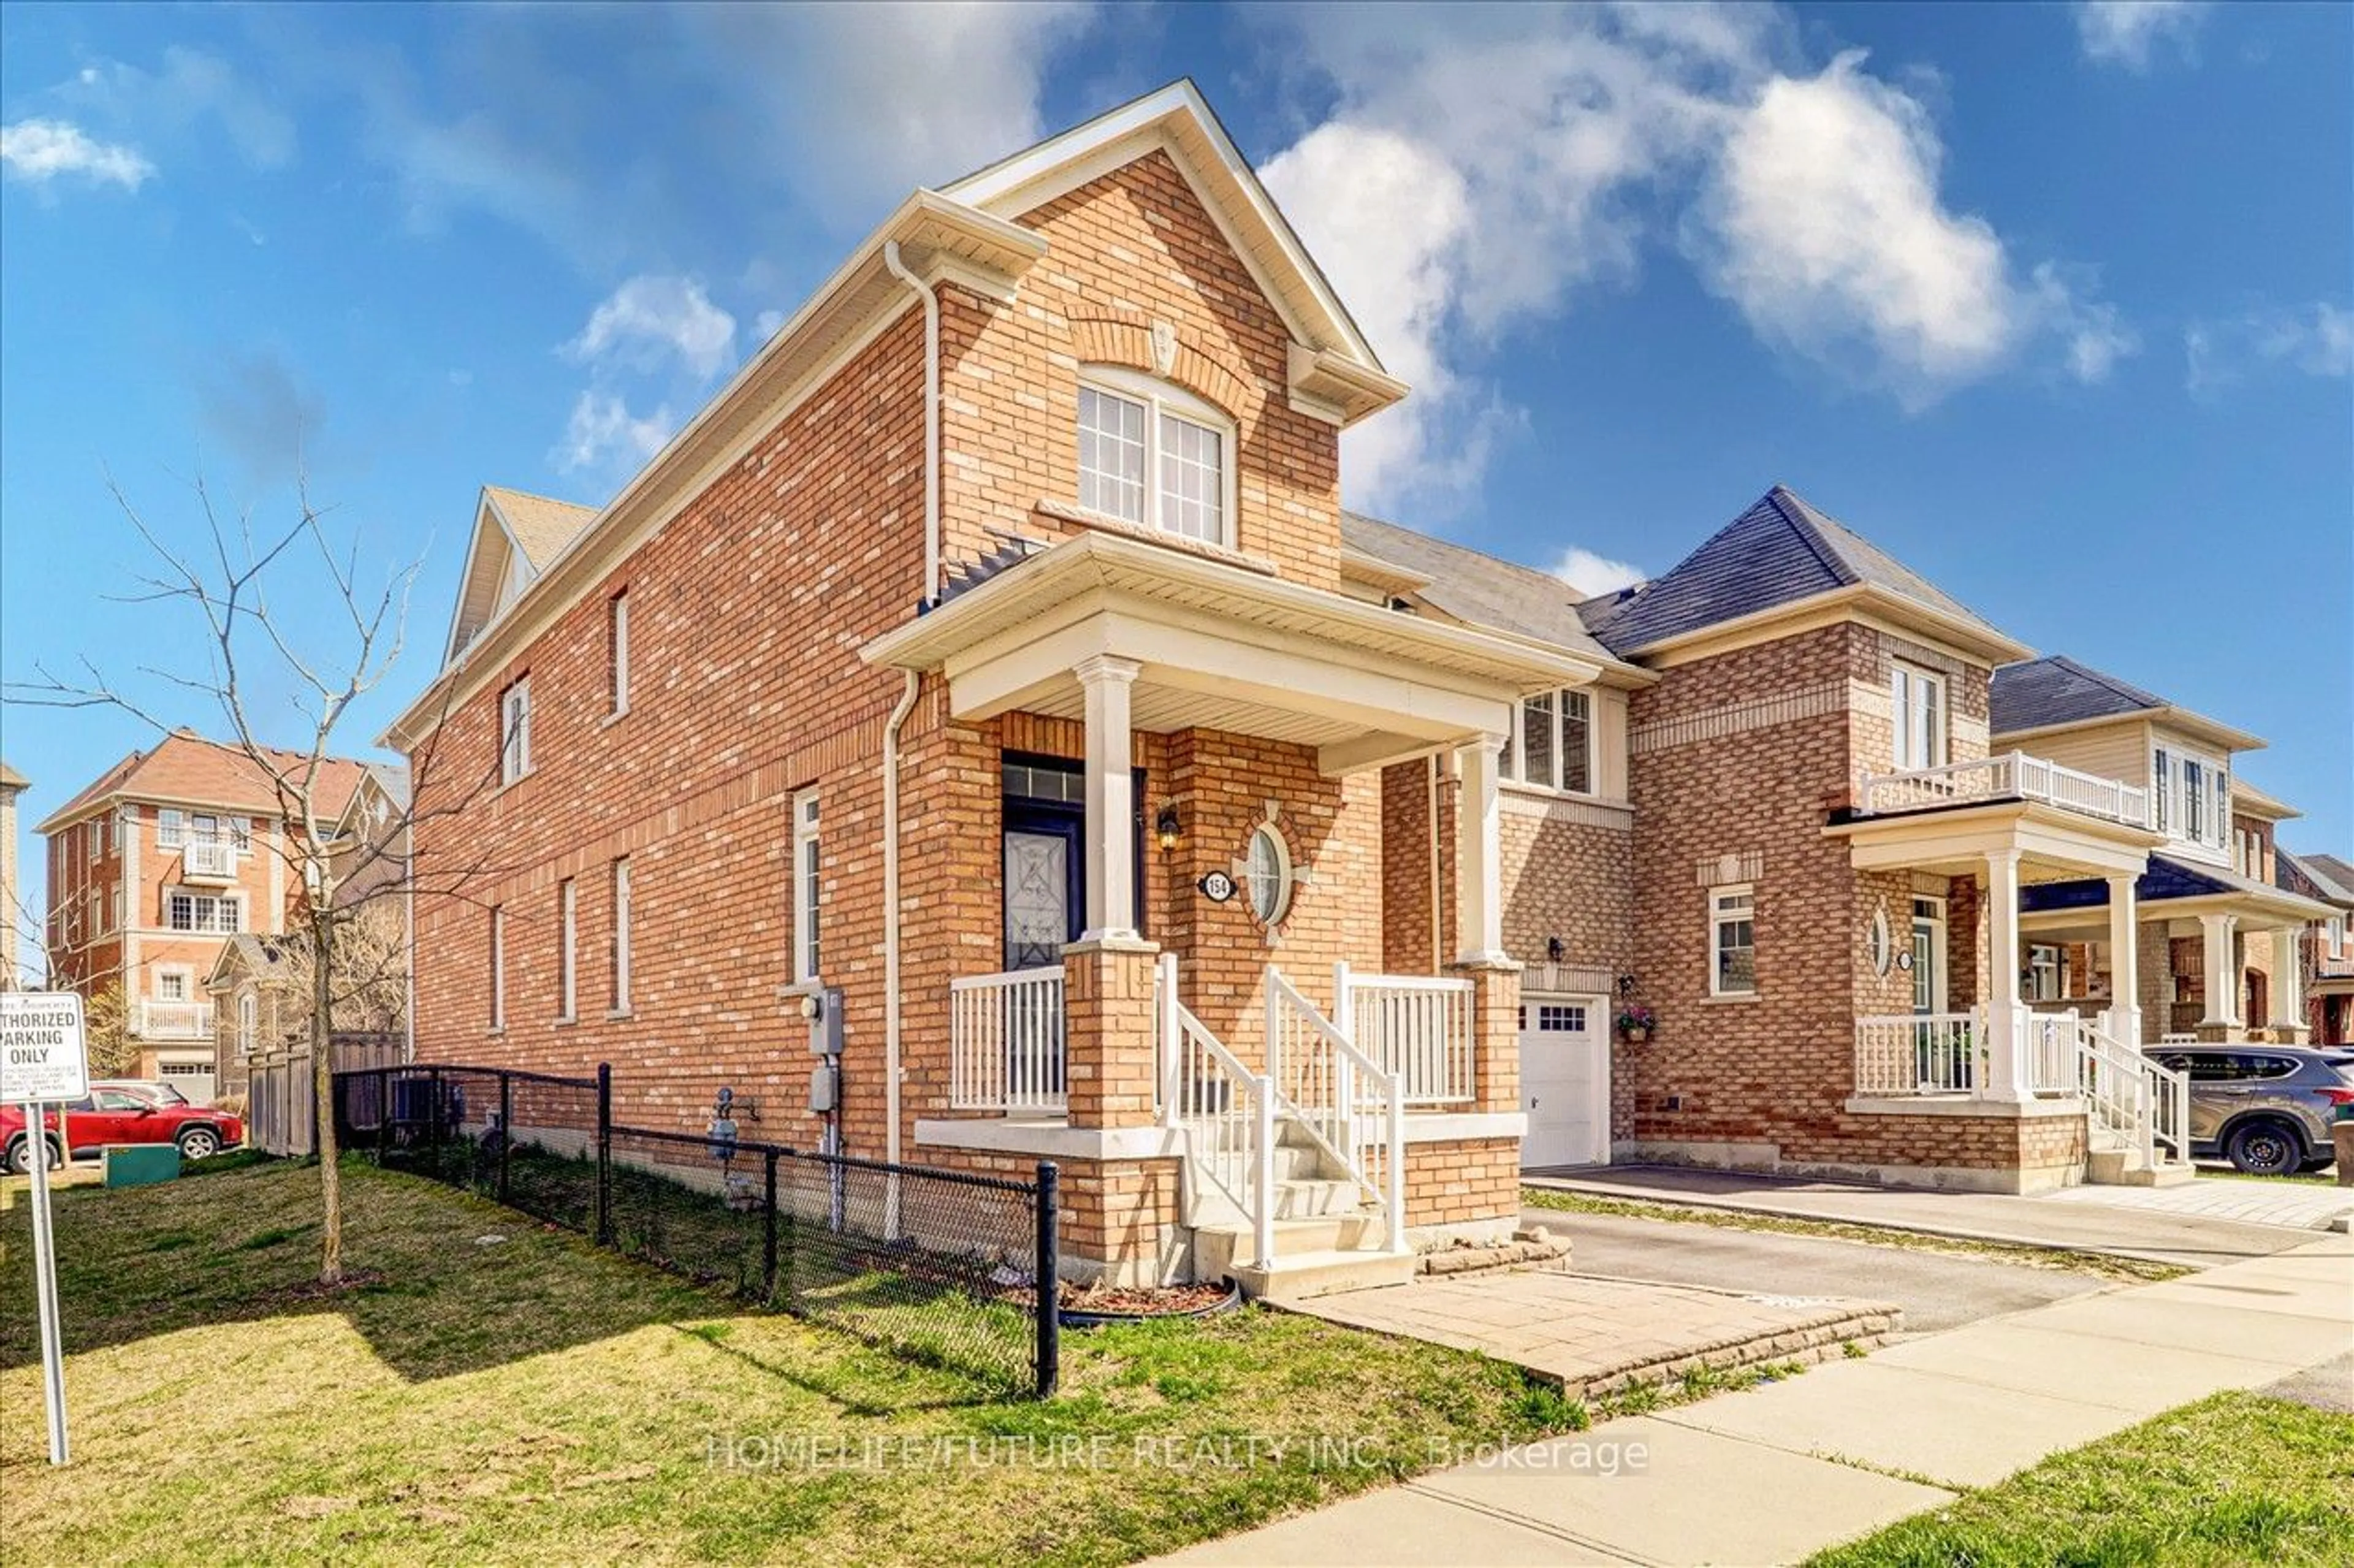 Home with brick exterior material for 154 Angus Dr, Ajax Ontario L1S 5G8